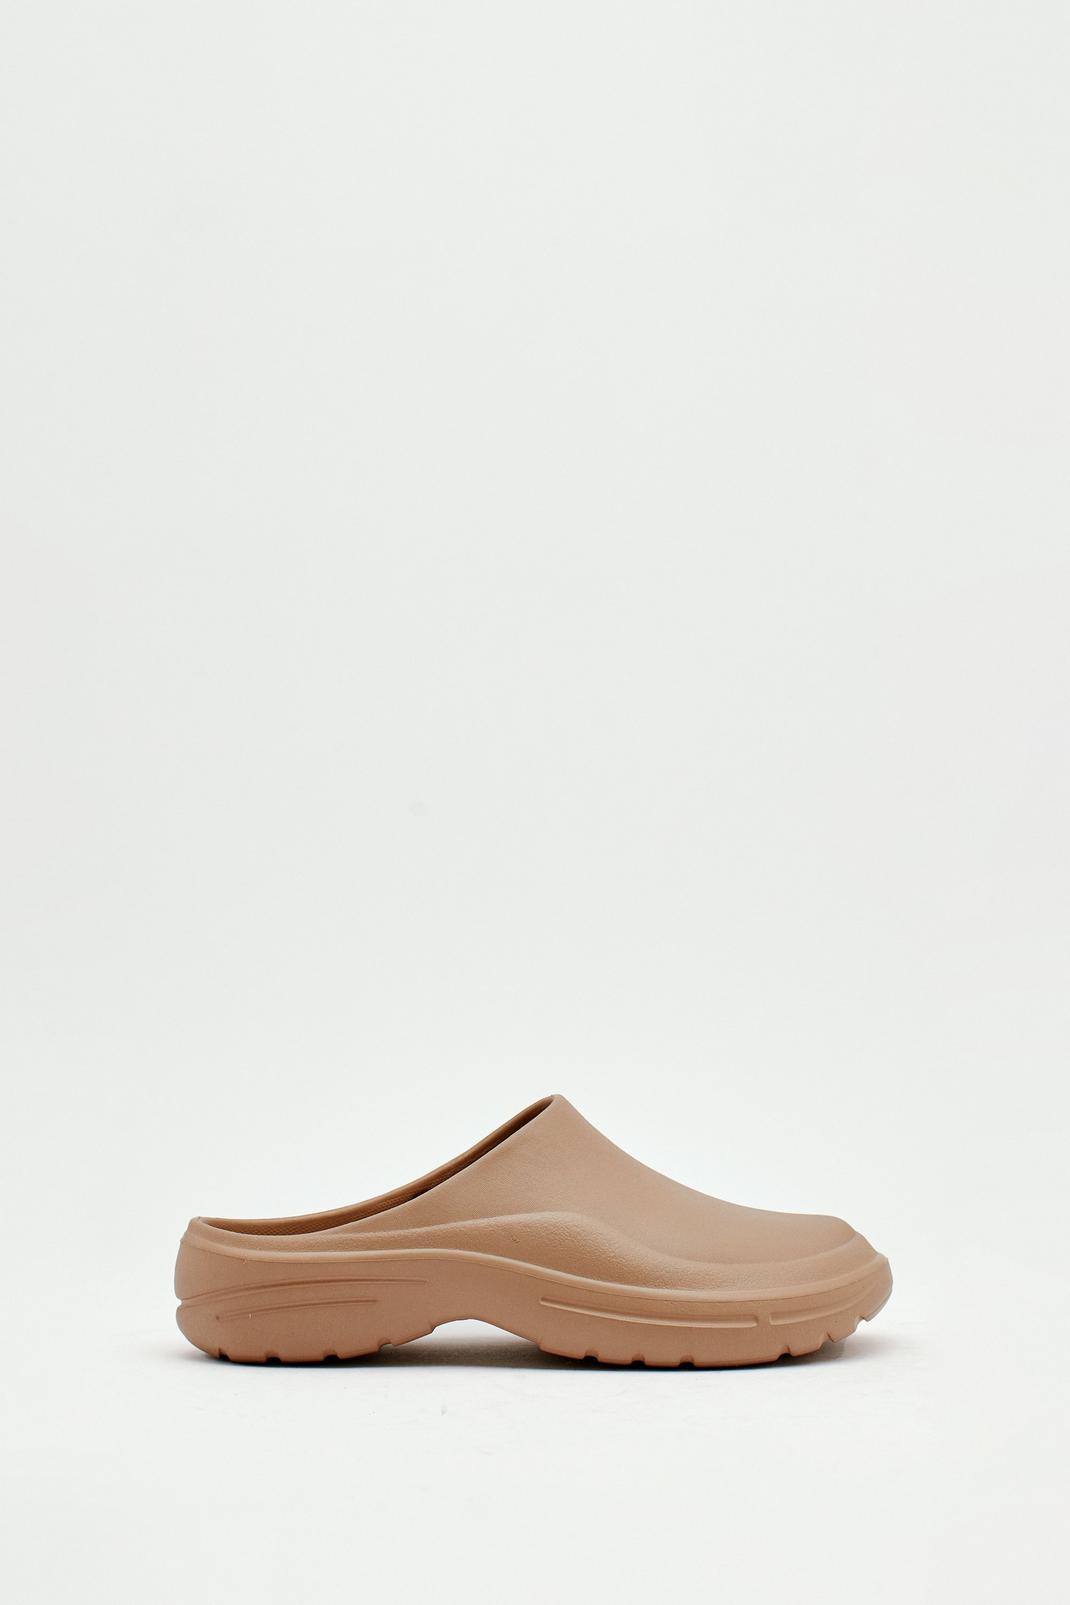 Mocha Closed Toe Rubber Cleated Sliders image number 1